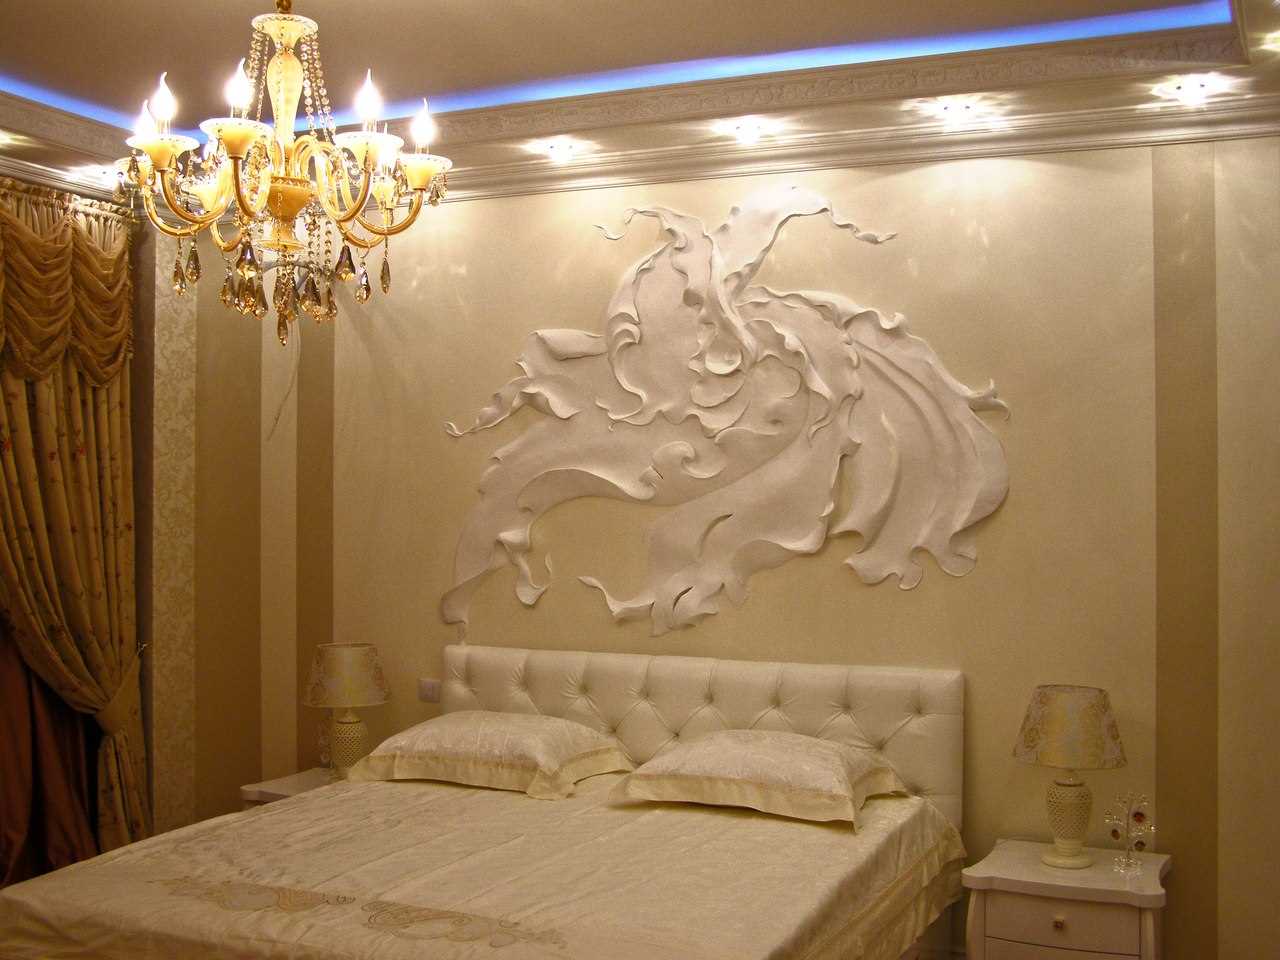 idea of ​​a modern room decor with a decorative pattern on the wall